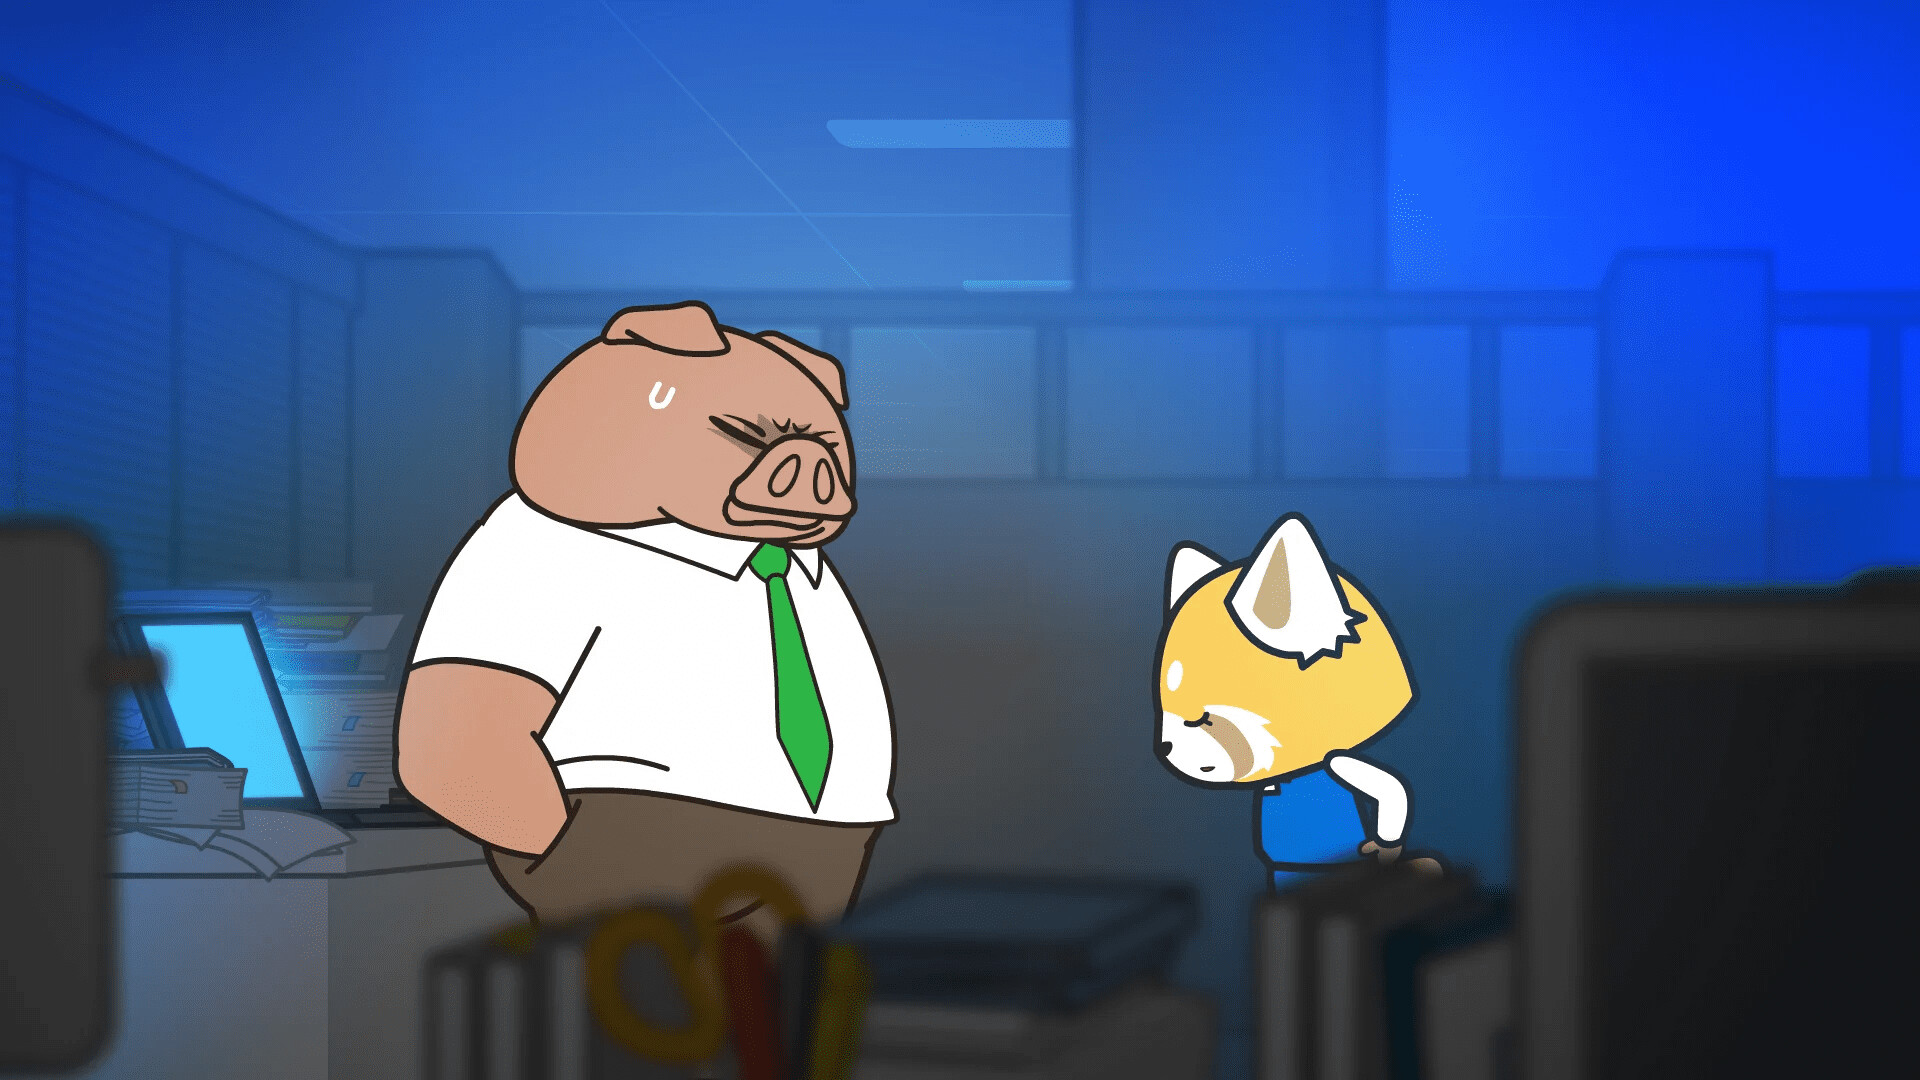 Aggretsuko: A Japanese animated comedy streaming television series, Ton. 1920x1080 Full HD Background.